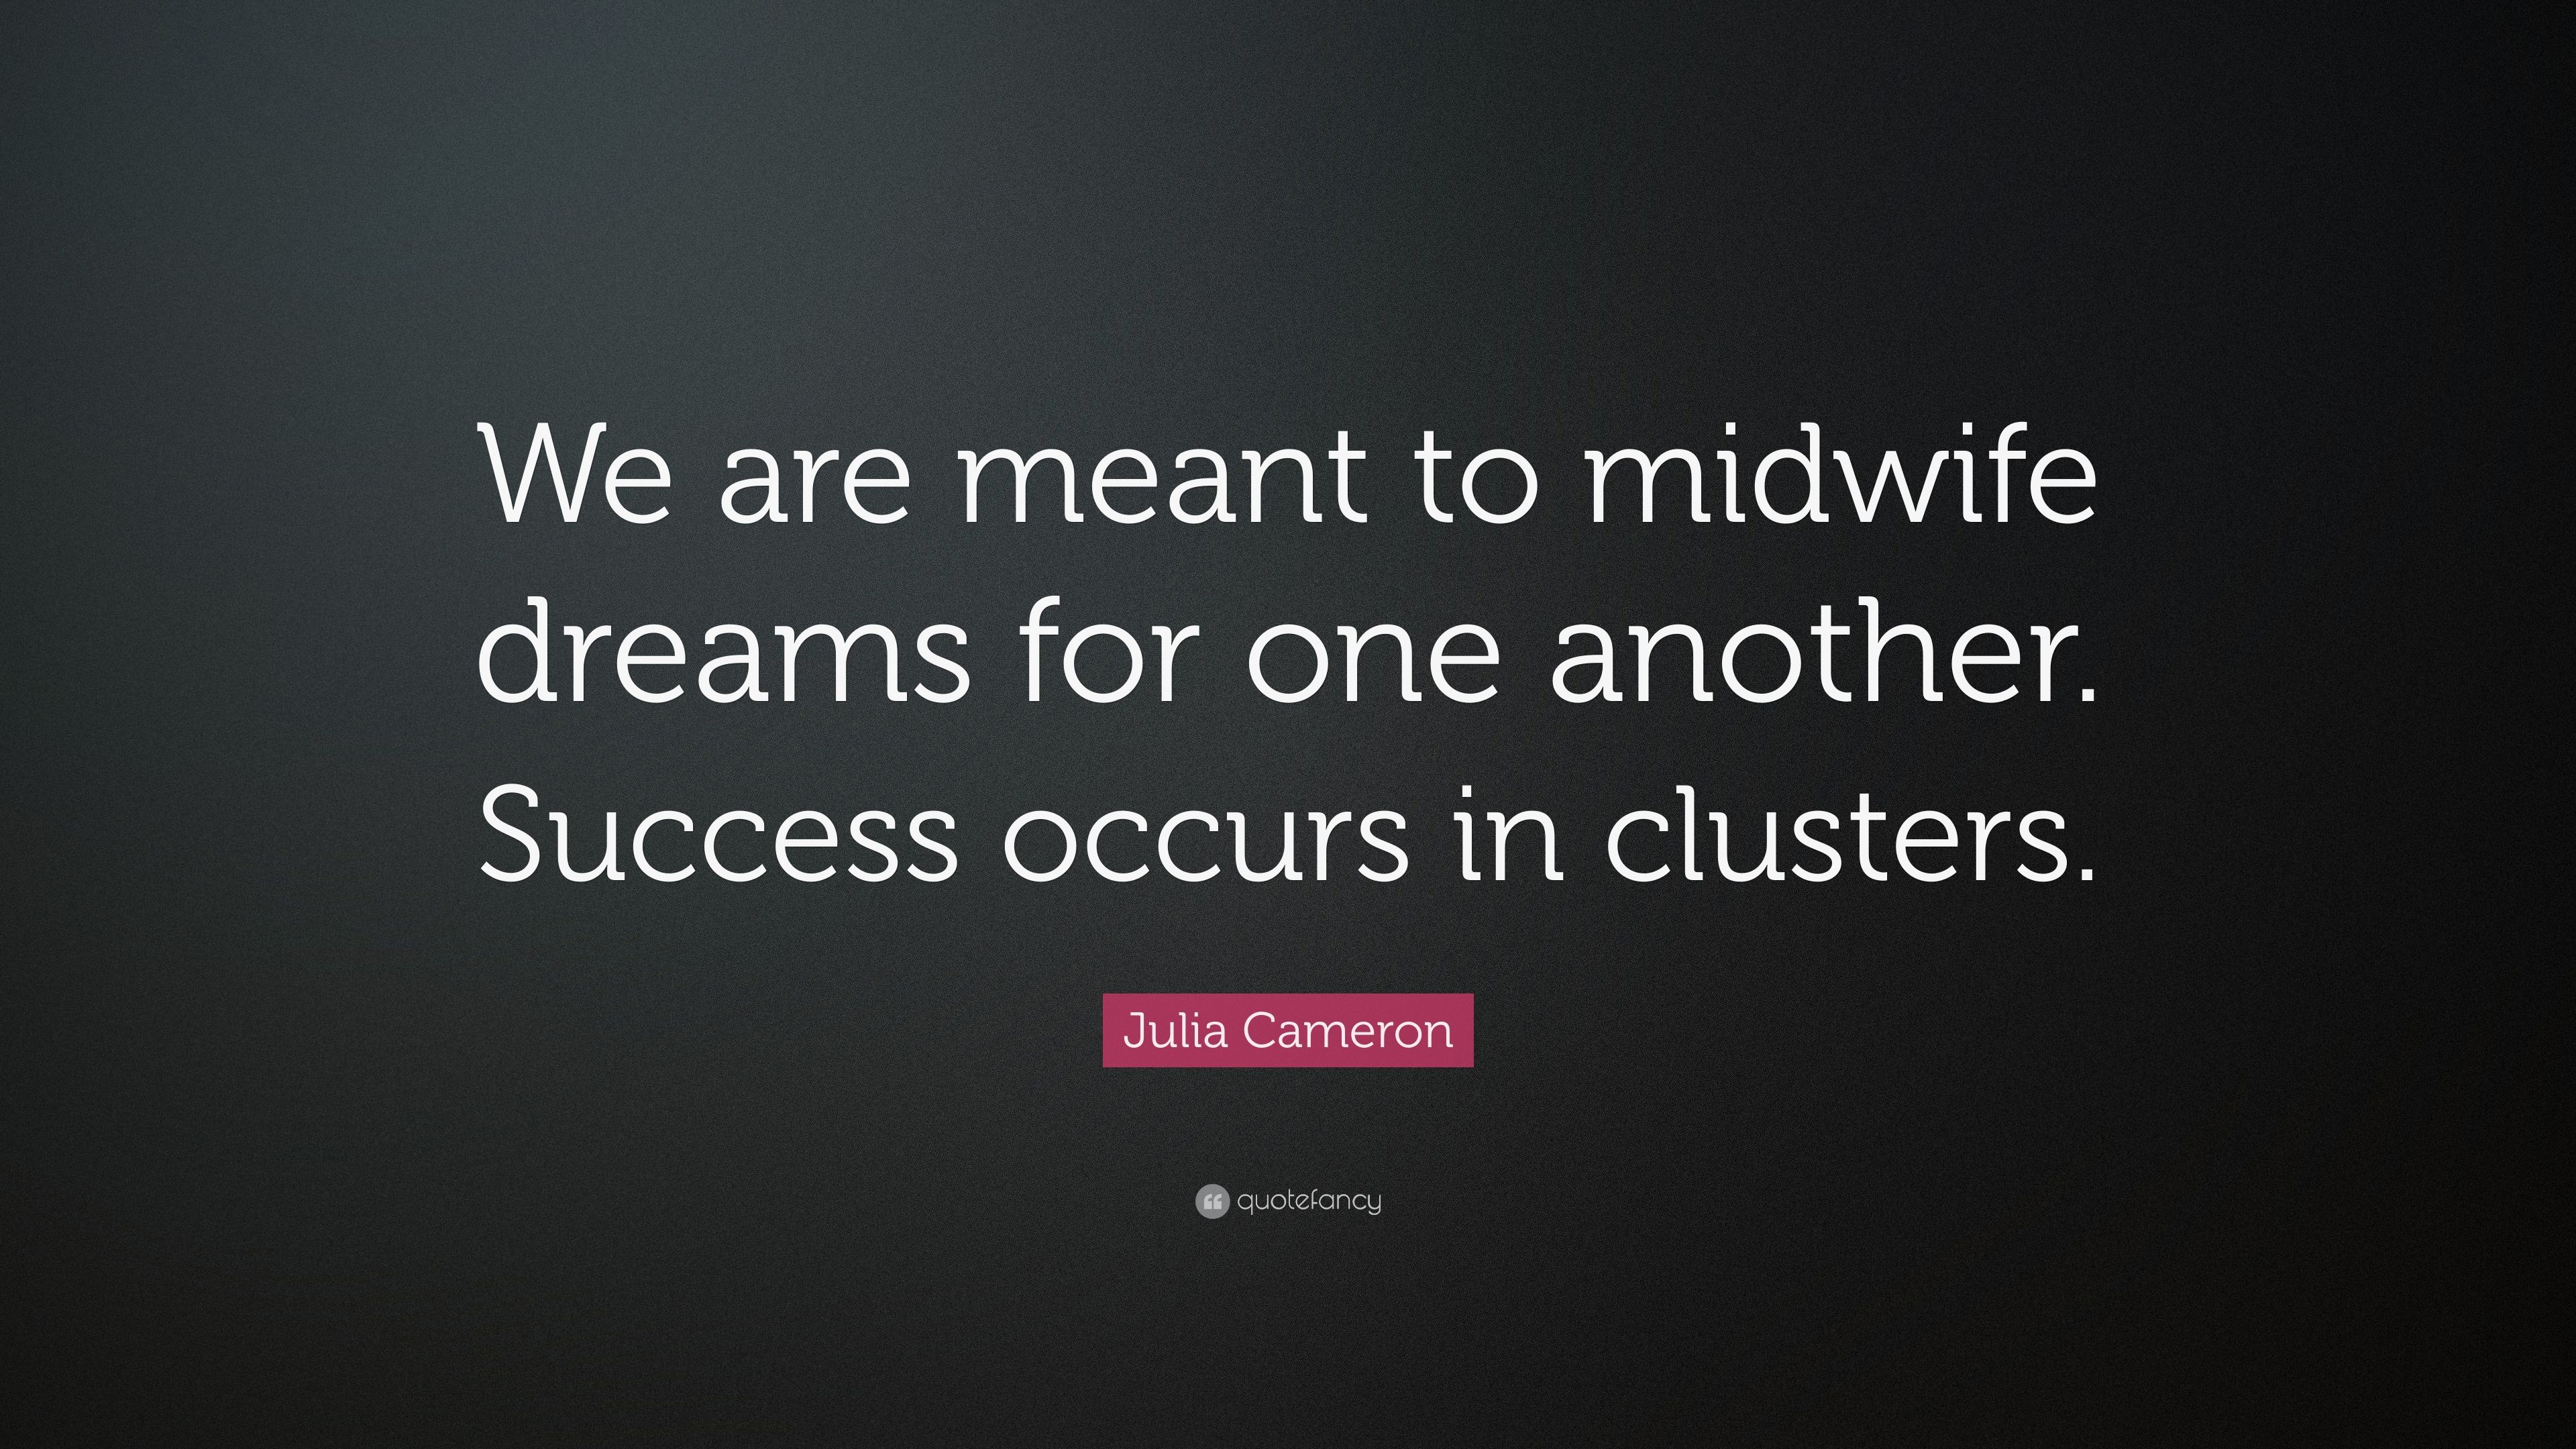 Julia Cameron Quote: “We are meant to midwife dreams for one another. Success occurs in clusters.”